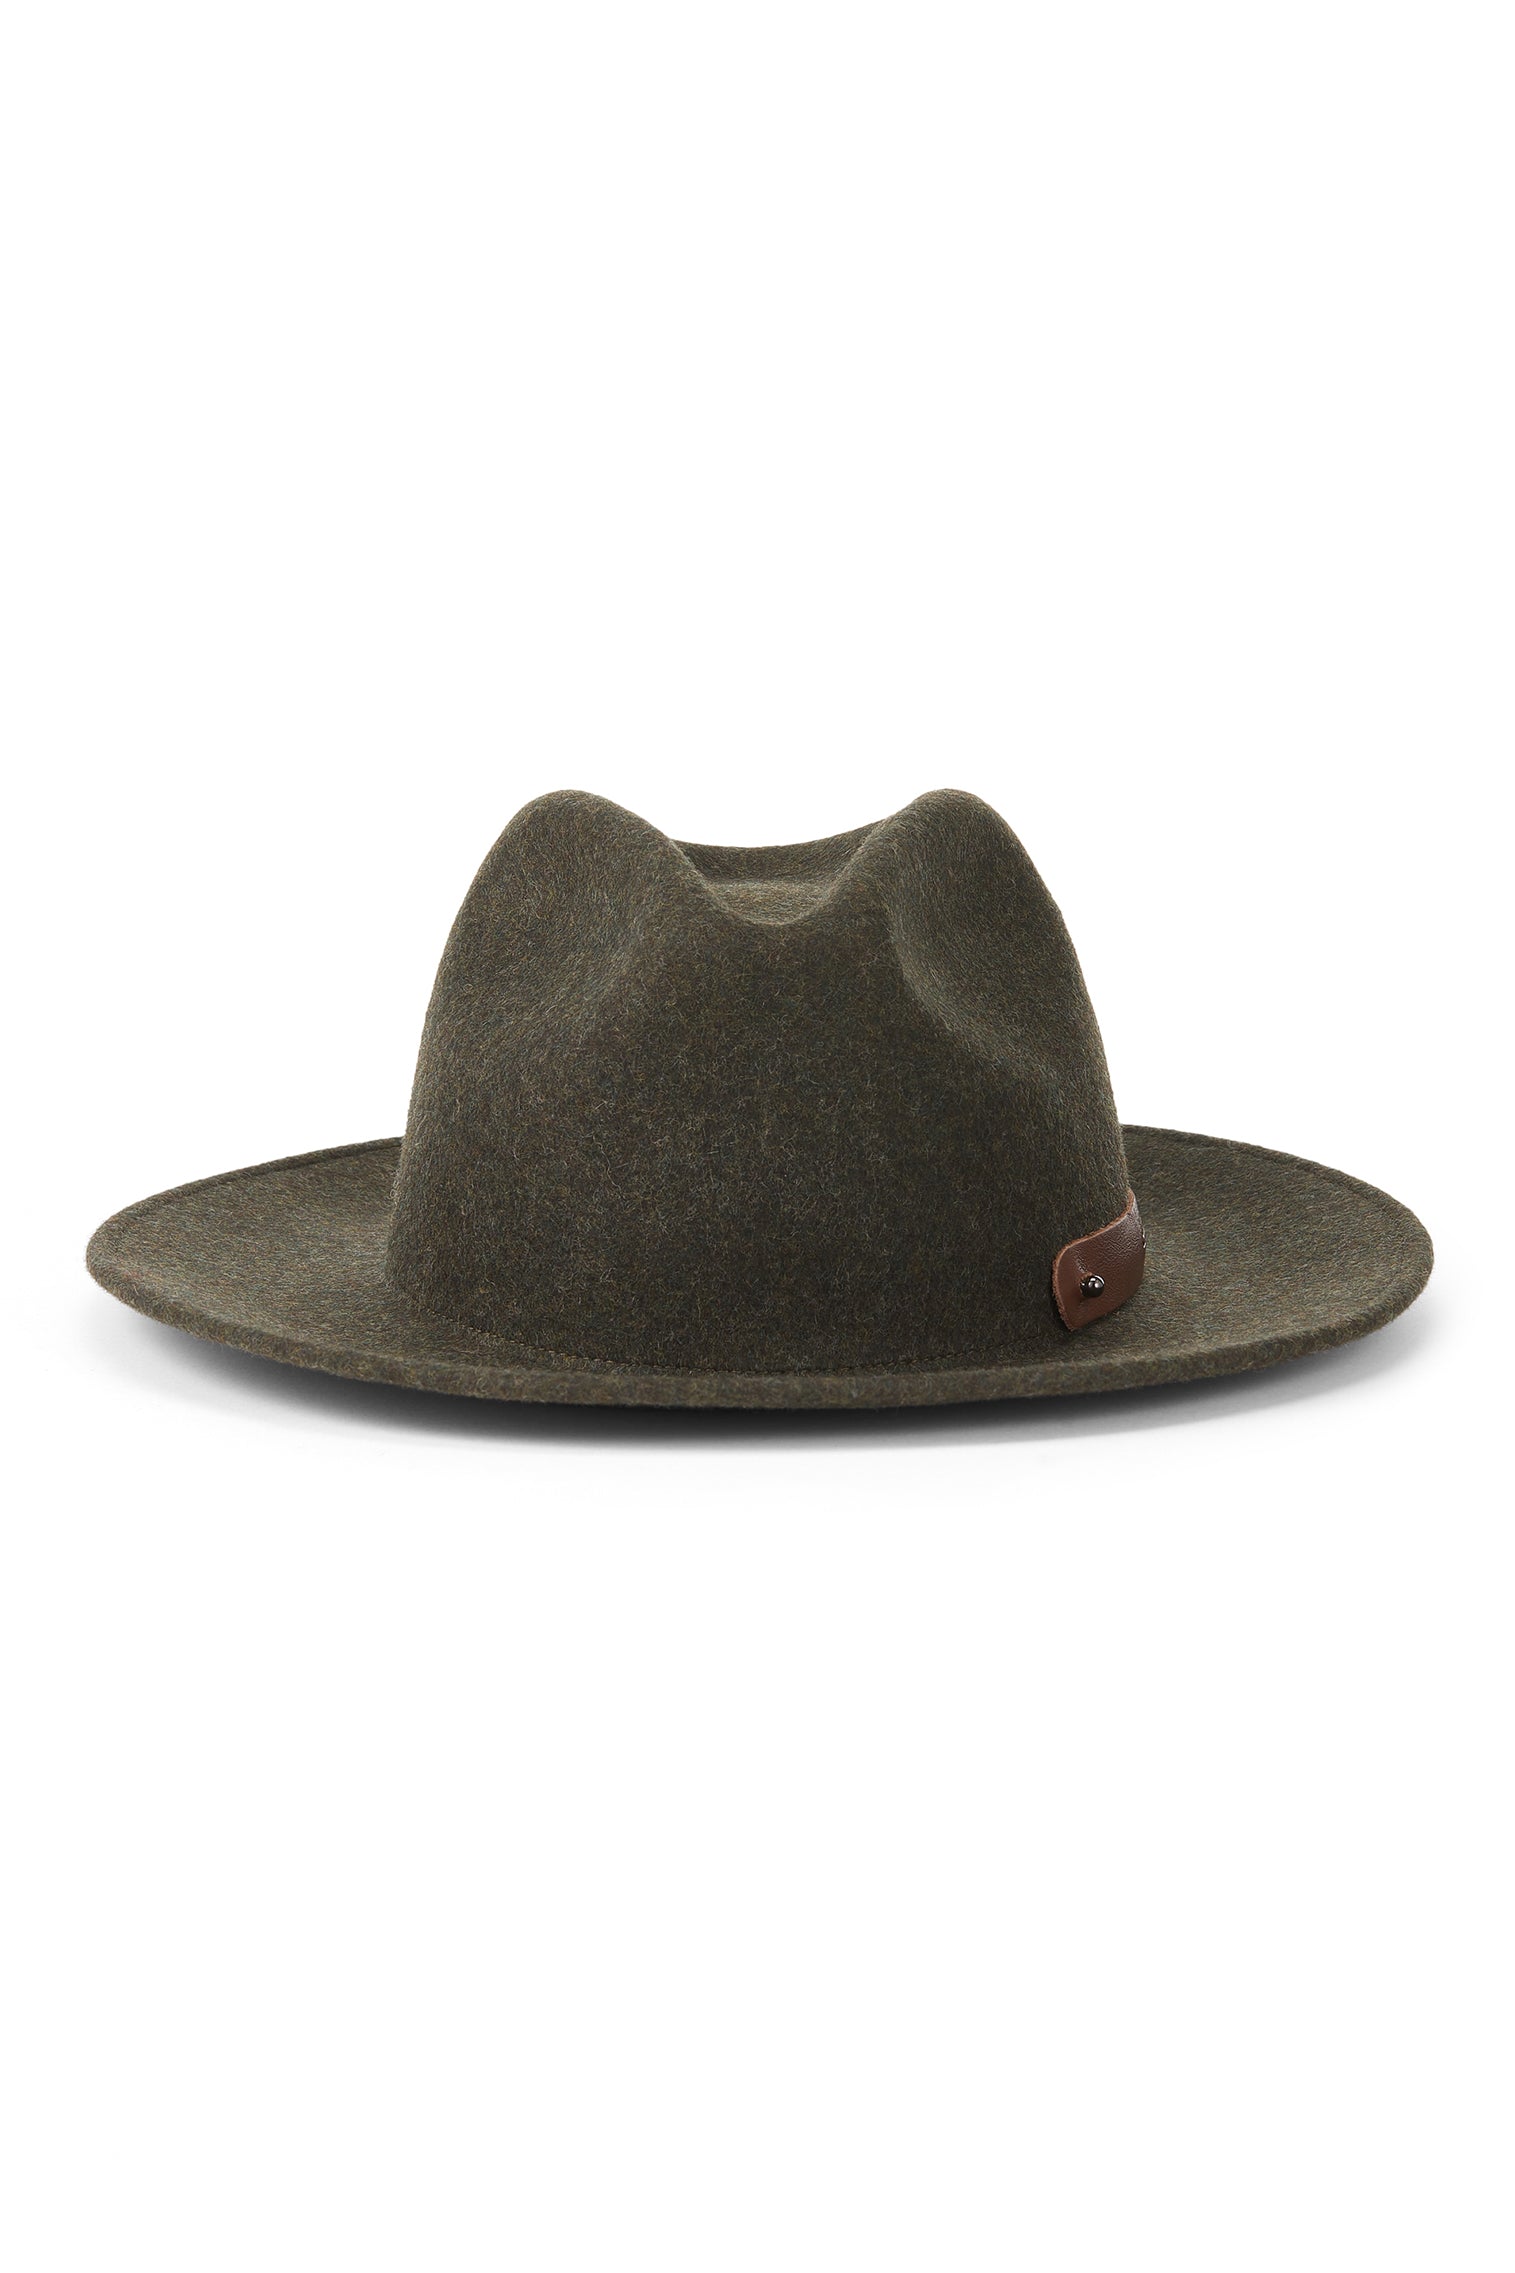 Cheltenham Rollable Trilby - Hats for Heart-shaped Face Shapes - Lock & Co. Hatters London UK